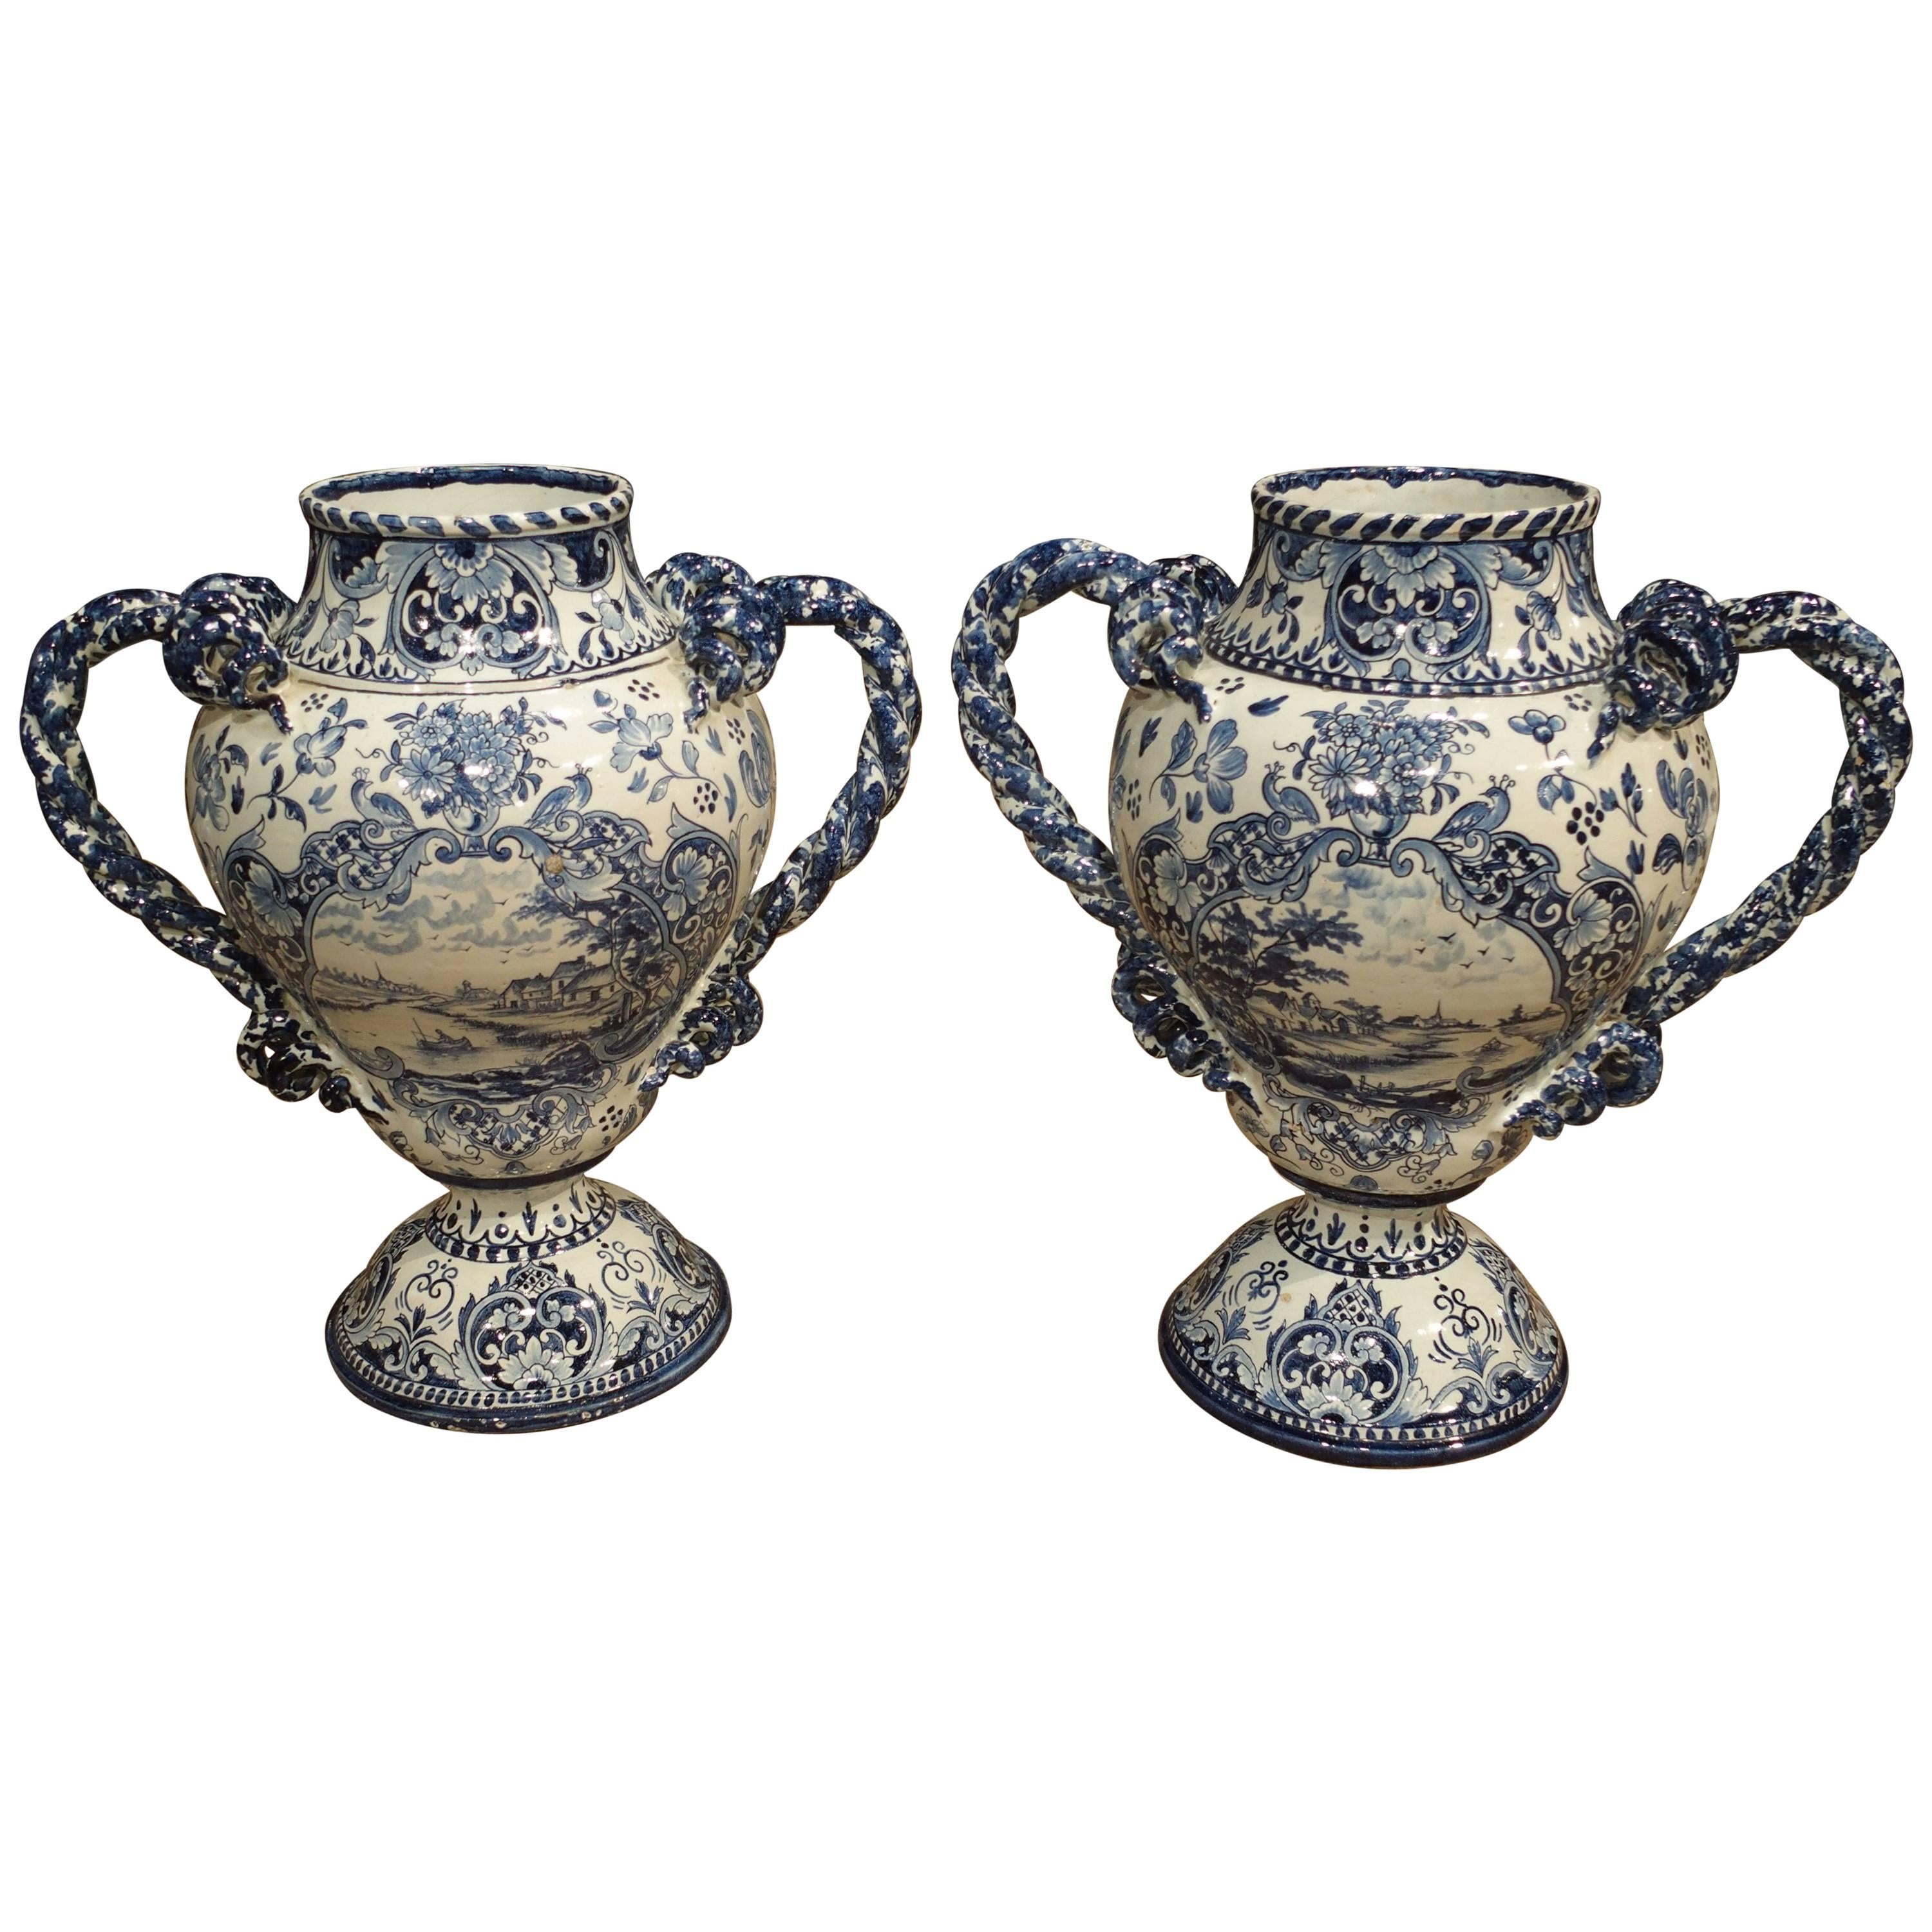 Pair of Antique Blue and White Vases, Early 1900s